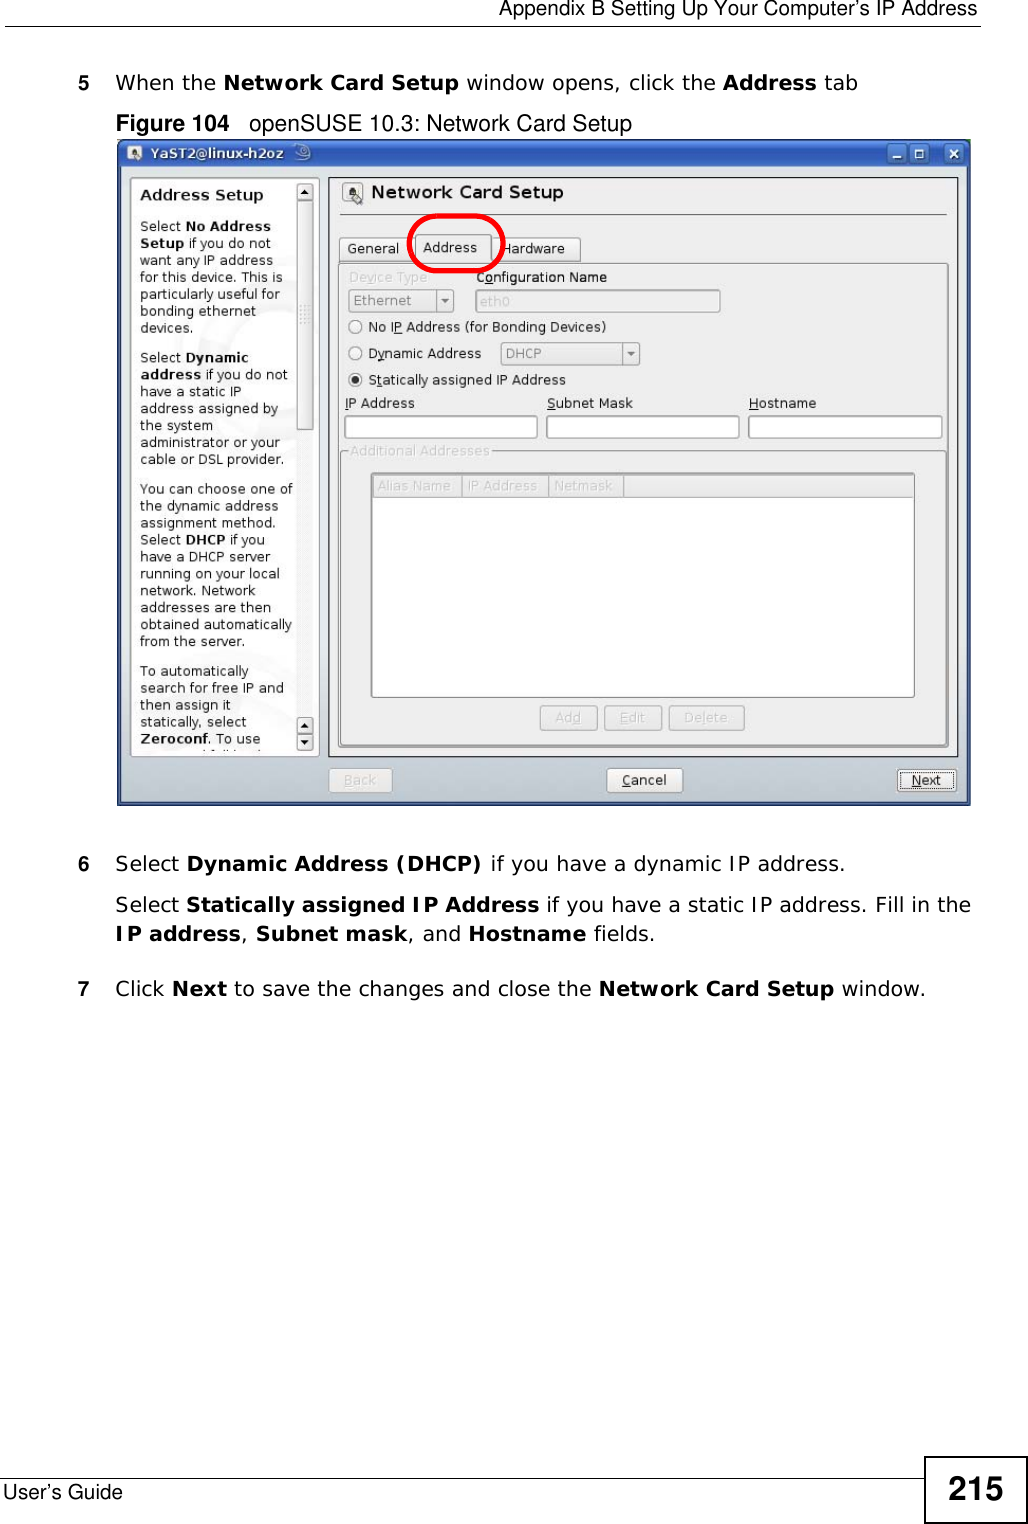  Appendix B Setting Up Your Computer’s IP AddressUser’s Guide 2155When the Network Card Setup window opens, click the Address tabFigure 104   openSUSE 10.3: Network Card Setup6Select Dynamic Address (DHCP) if you have a dynamic IP address.Select Statically assigned IP Address if you have a static IP address. Fill in the IP address, Subnet mask, and Hostname fields.7Click Next to save the changes and close the Network Card Setup window. 